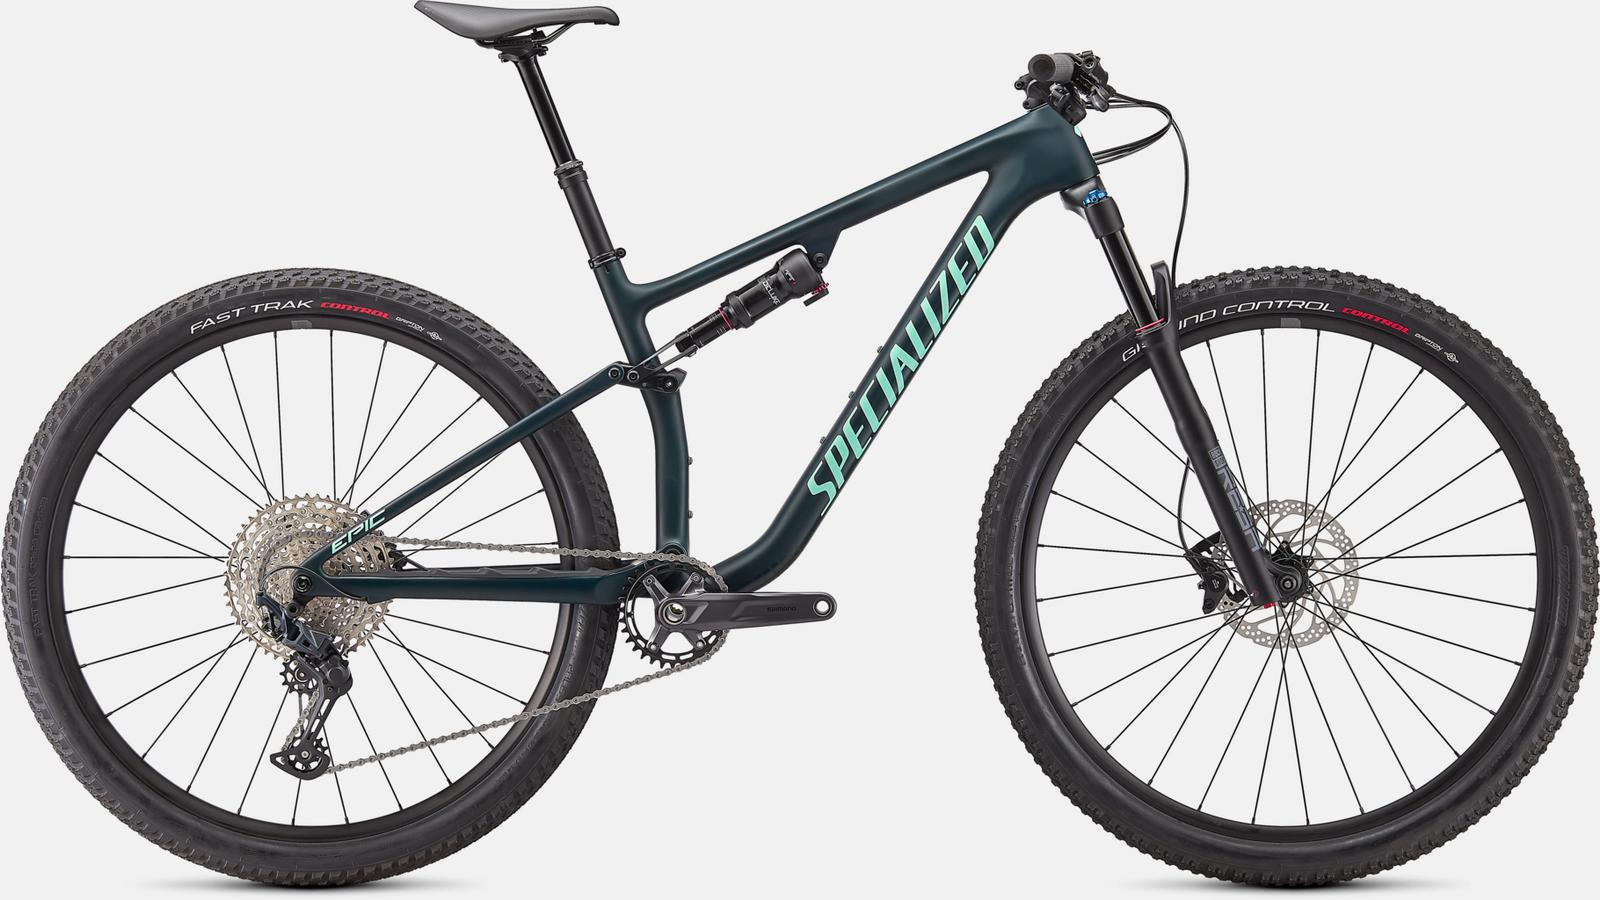 Paint for 2021 Specialized Epic EVO - Satin Forest Green